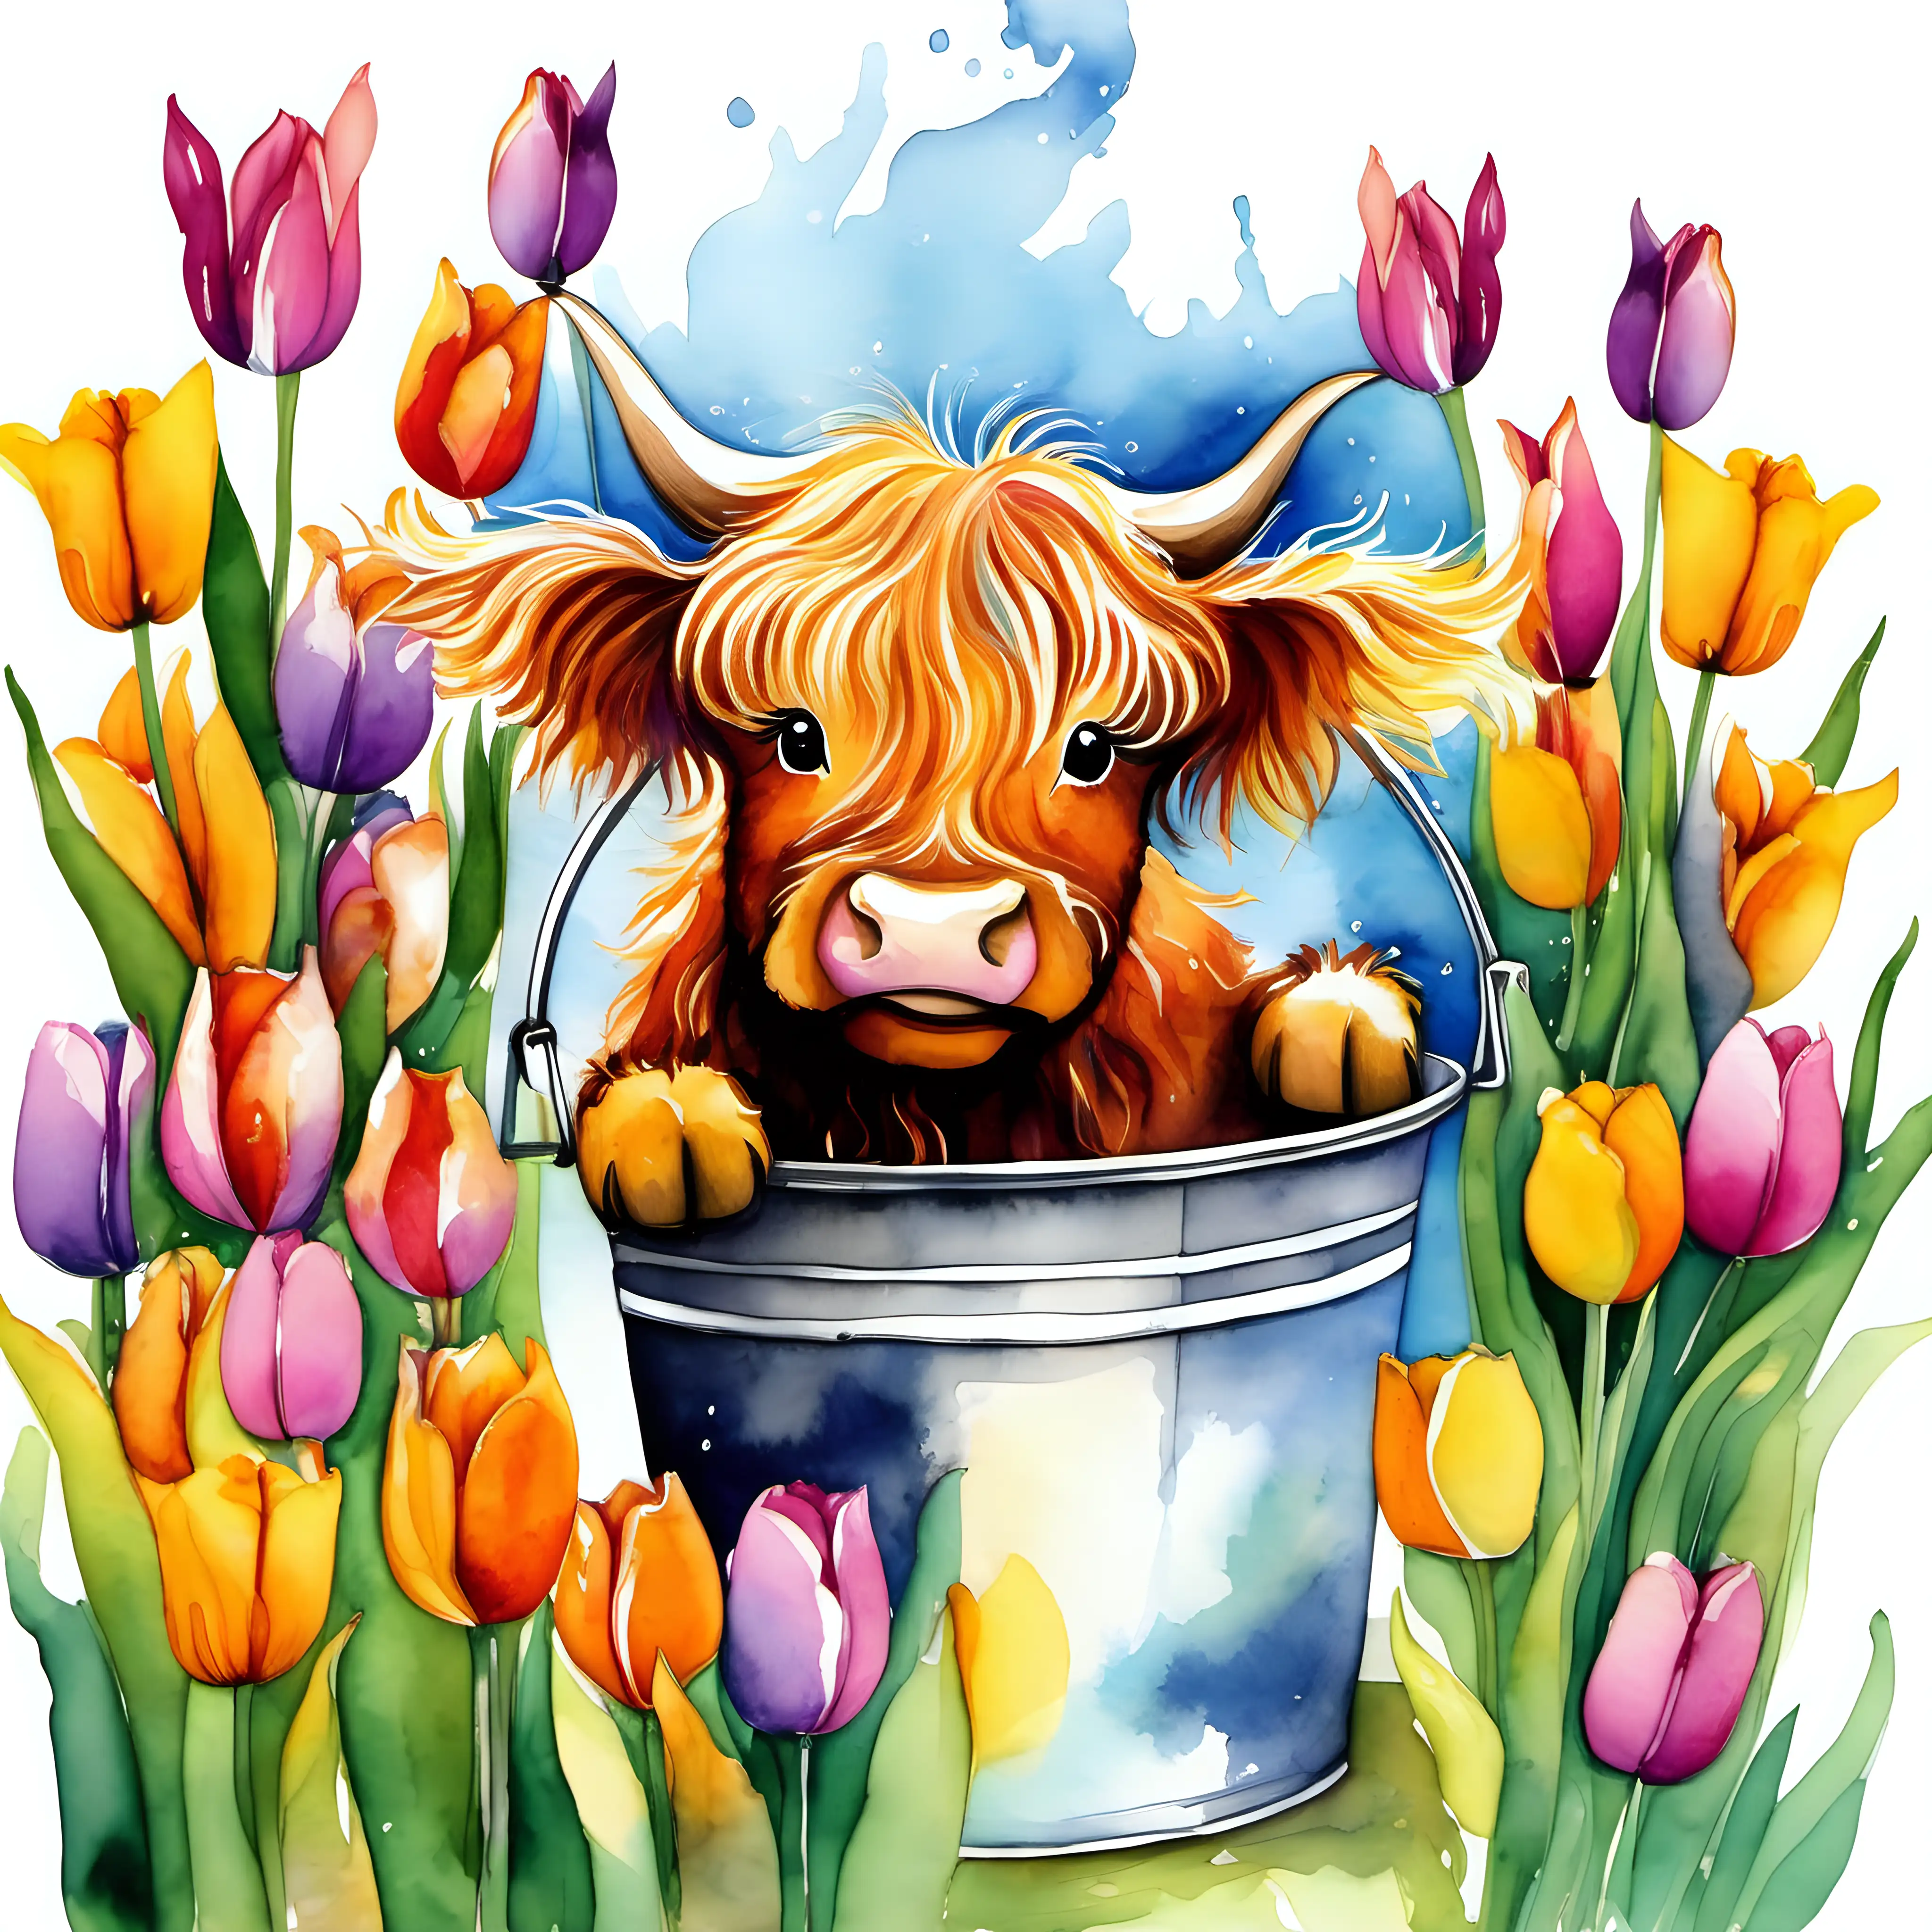 Picture a whimsical setting with a baby highland cow joyfully splashing in a bucket filled with vibrant tulips. The watercolors should showcase the bold and varied colors of the tulips, creating a lively and playful atmosphere for the calf's midjourney exploration.